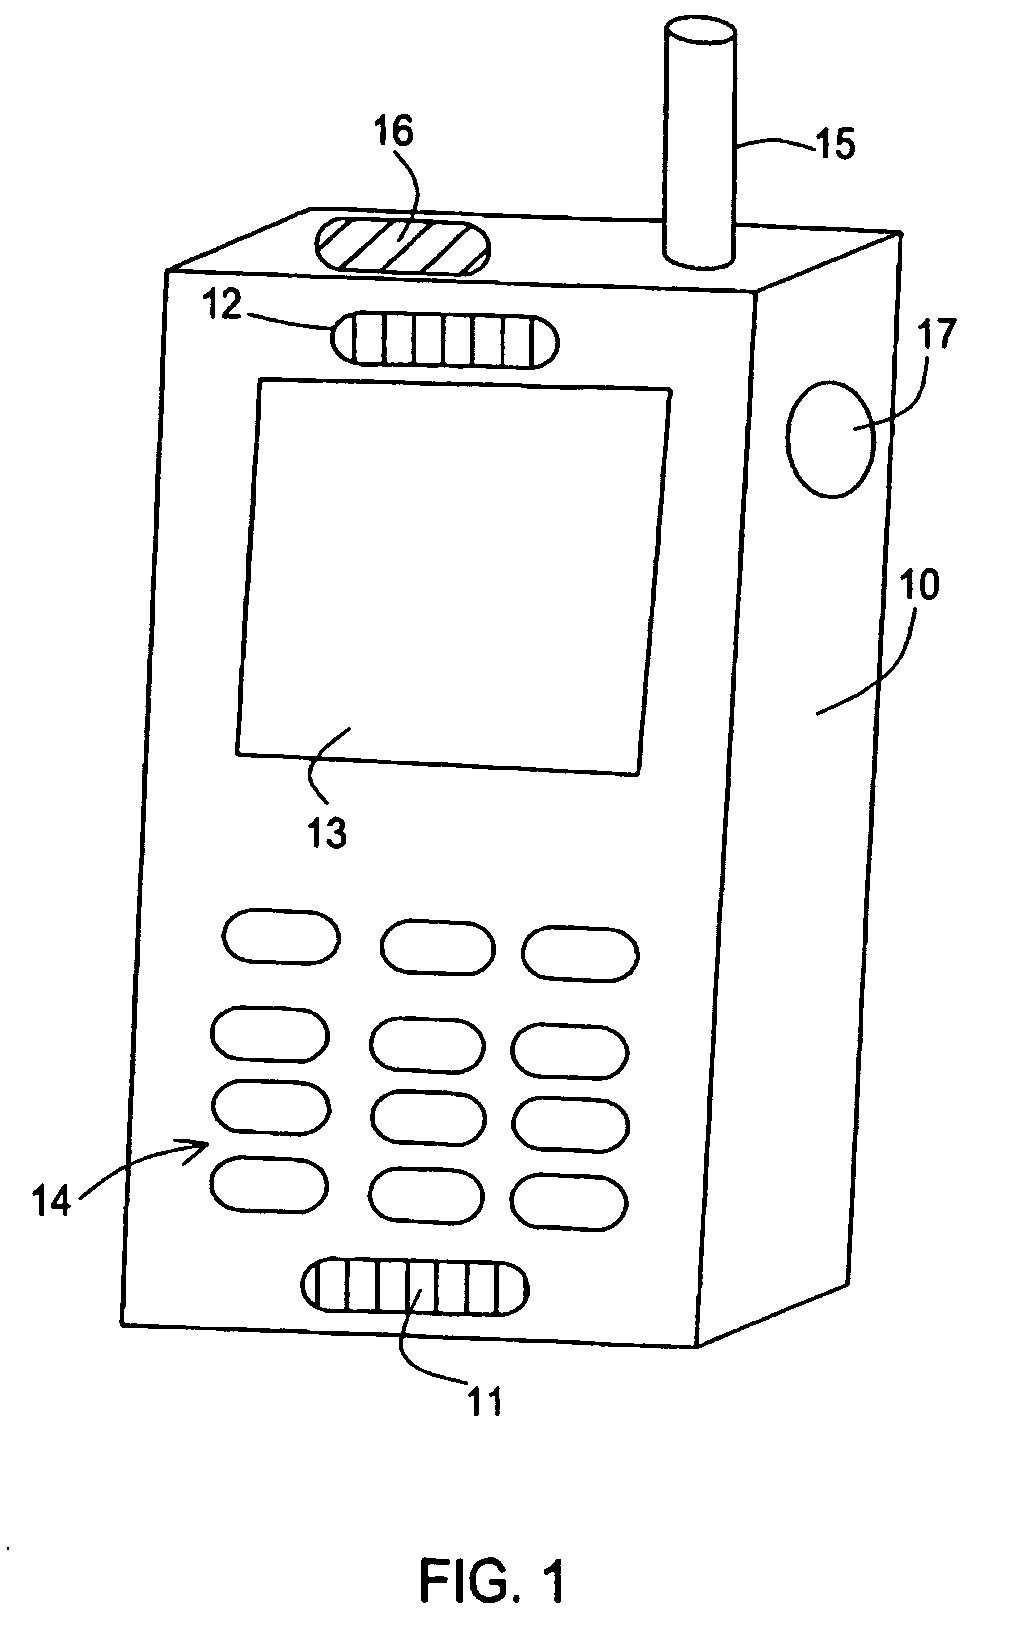 Environmental noise reduction and cancellation for a cellular telephone communication device